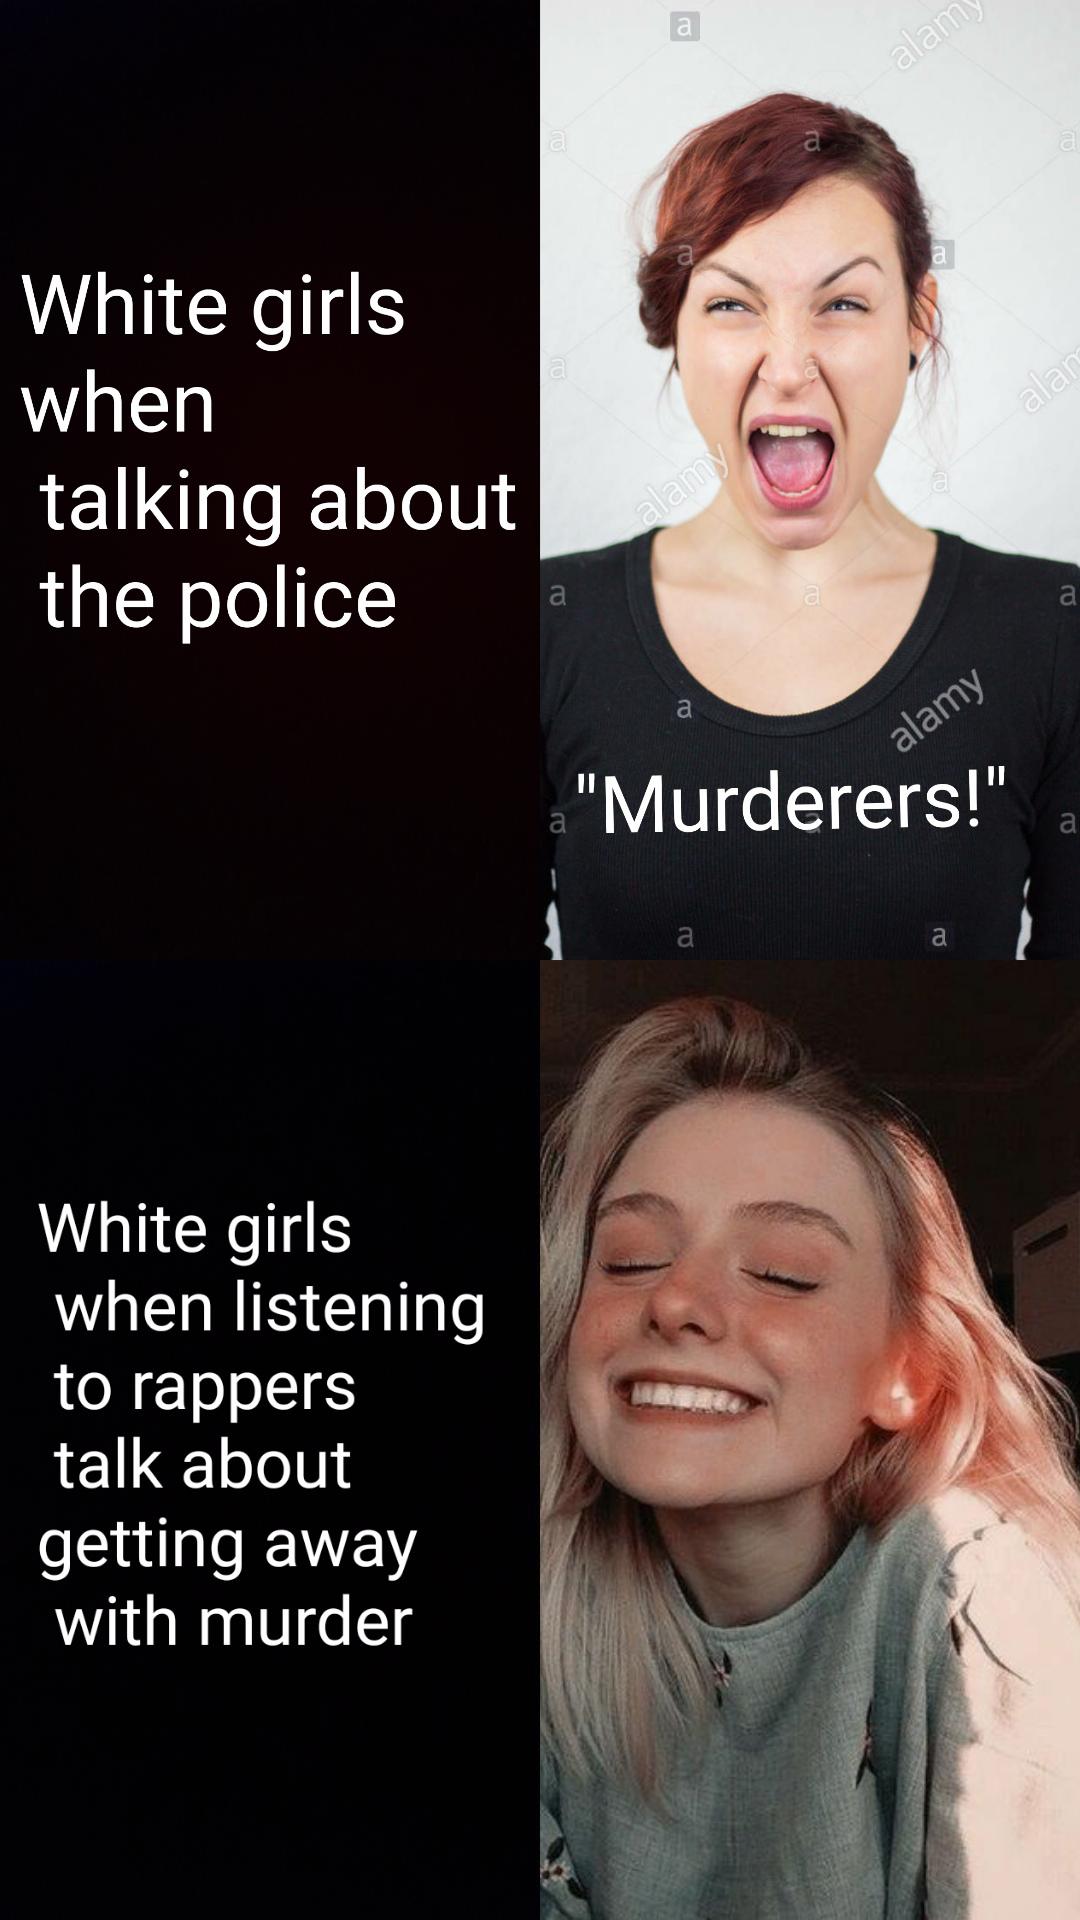 alam a alar White girls when talking about the police alamy a a a alamy "Murderers!" a a White girls when listening to rappers talk about getting away with murder